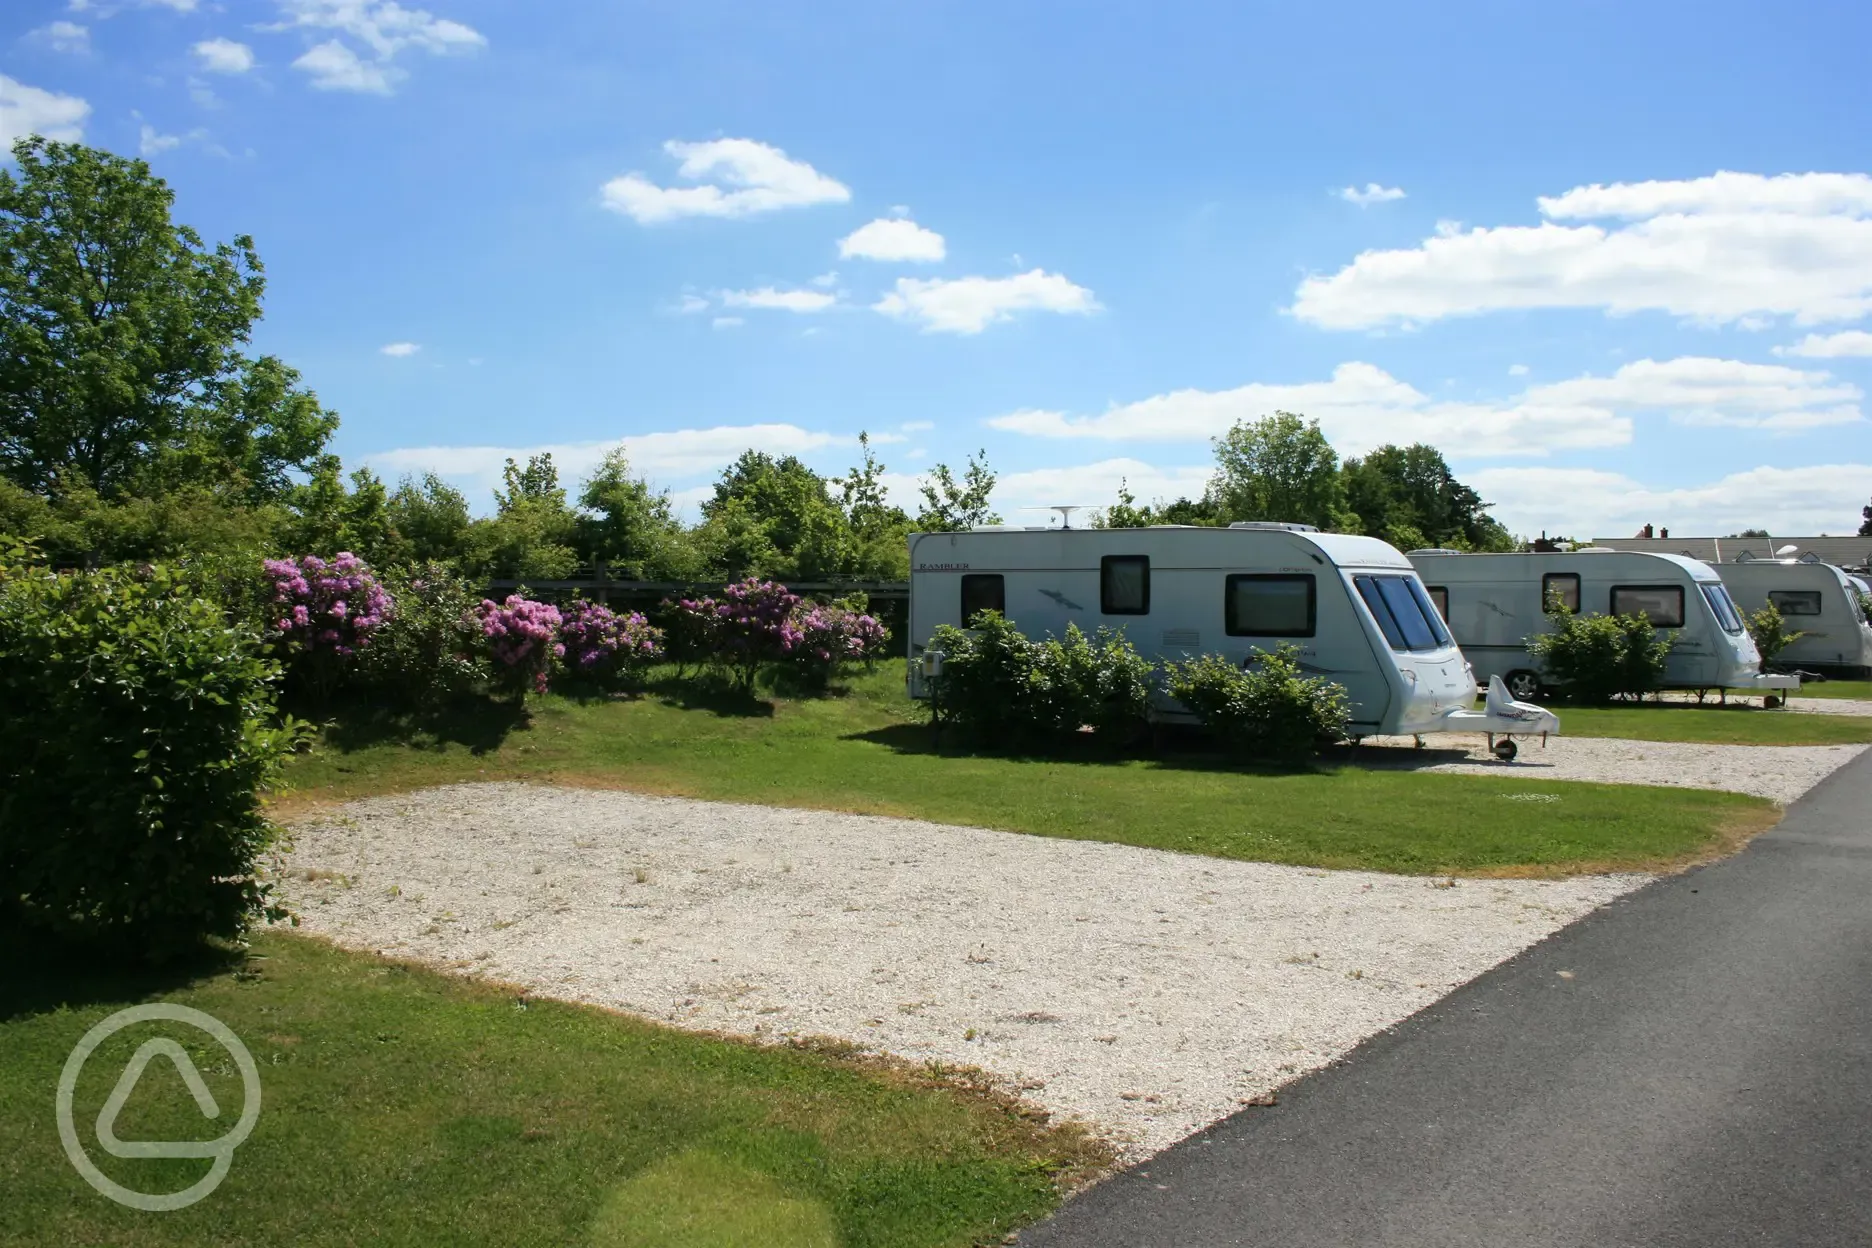 Hardstanding at Jacobs Mount Caravan and Camping Park